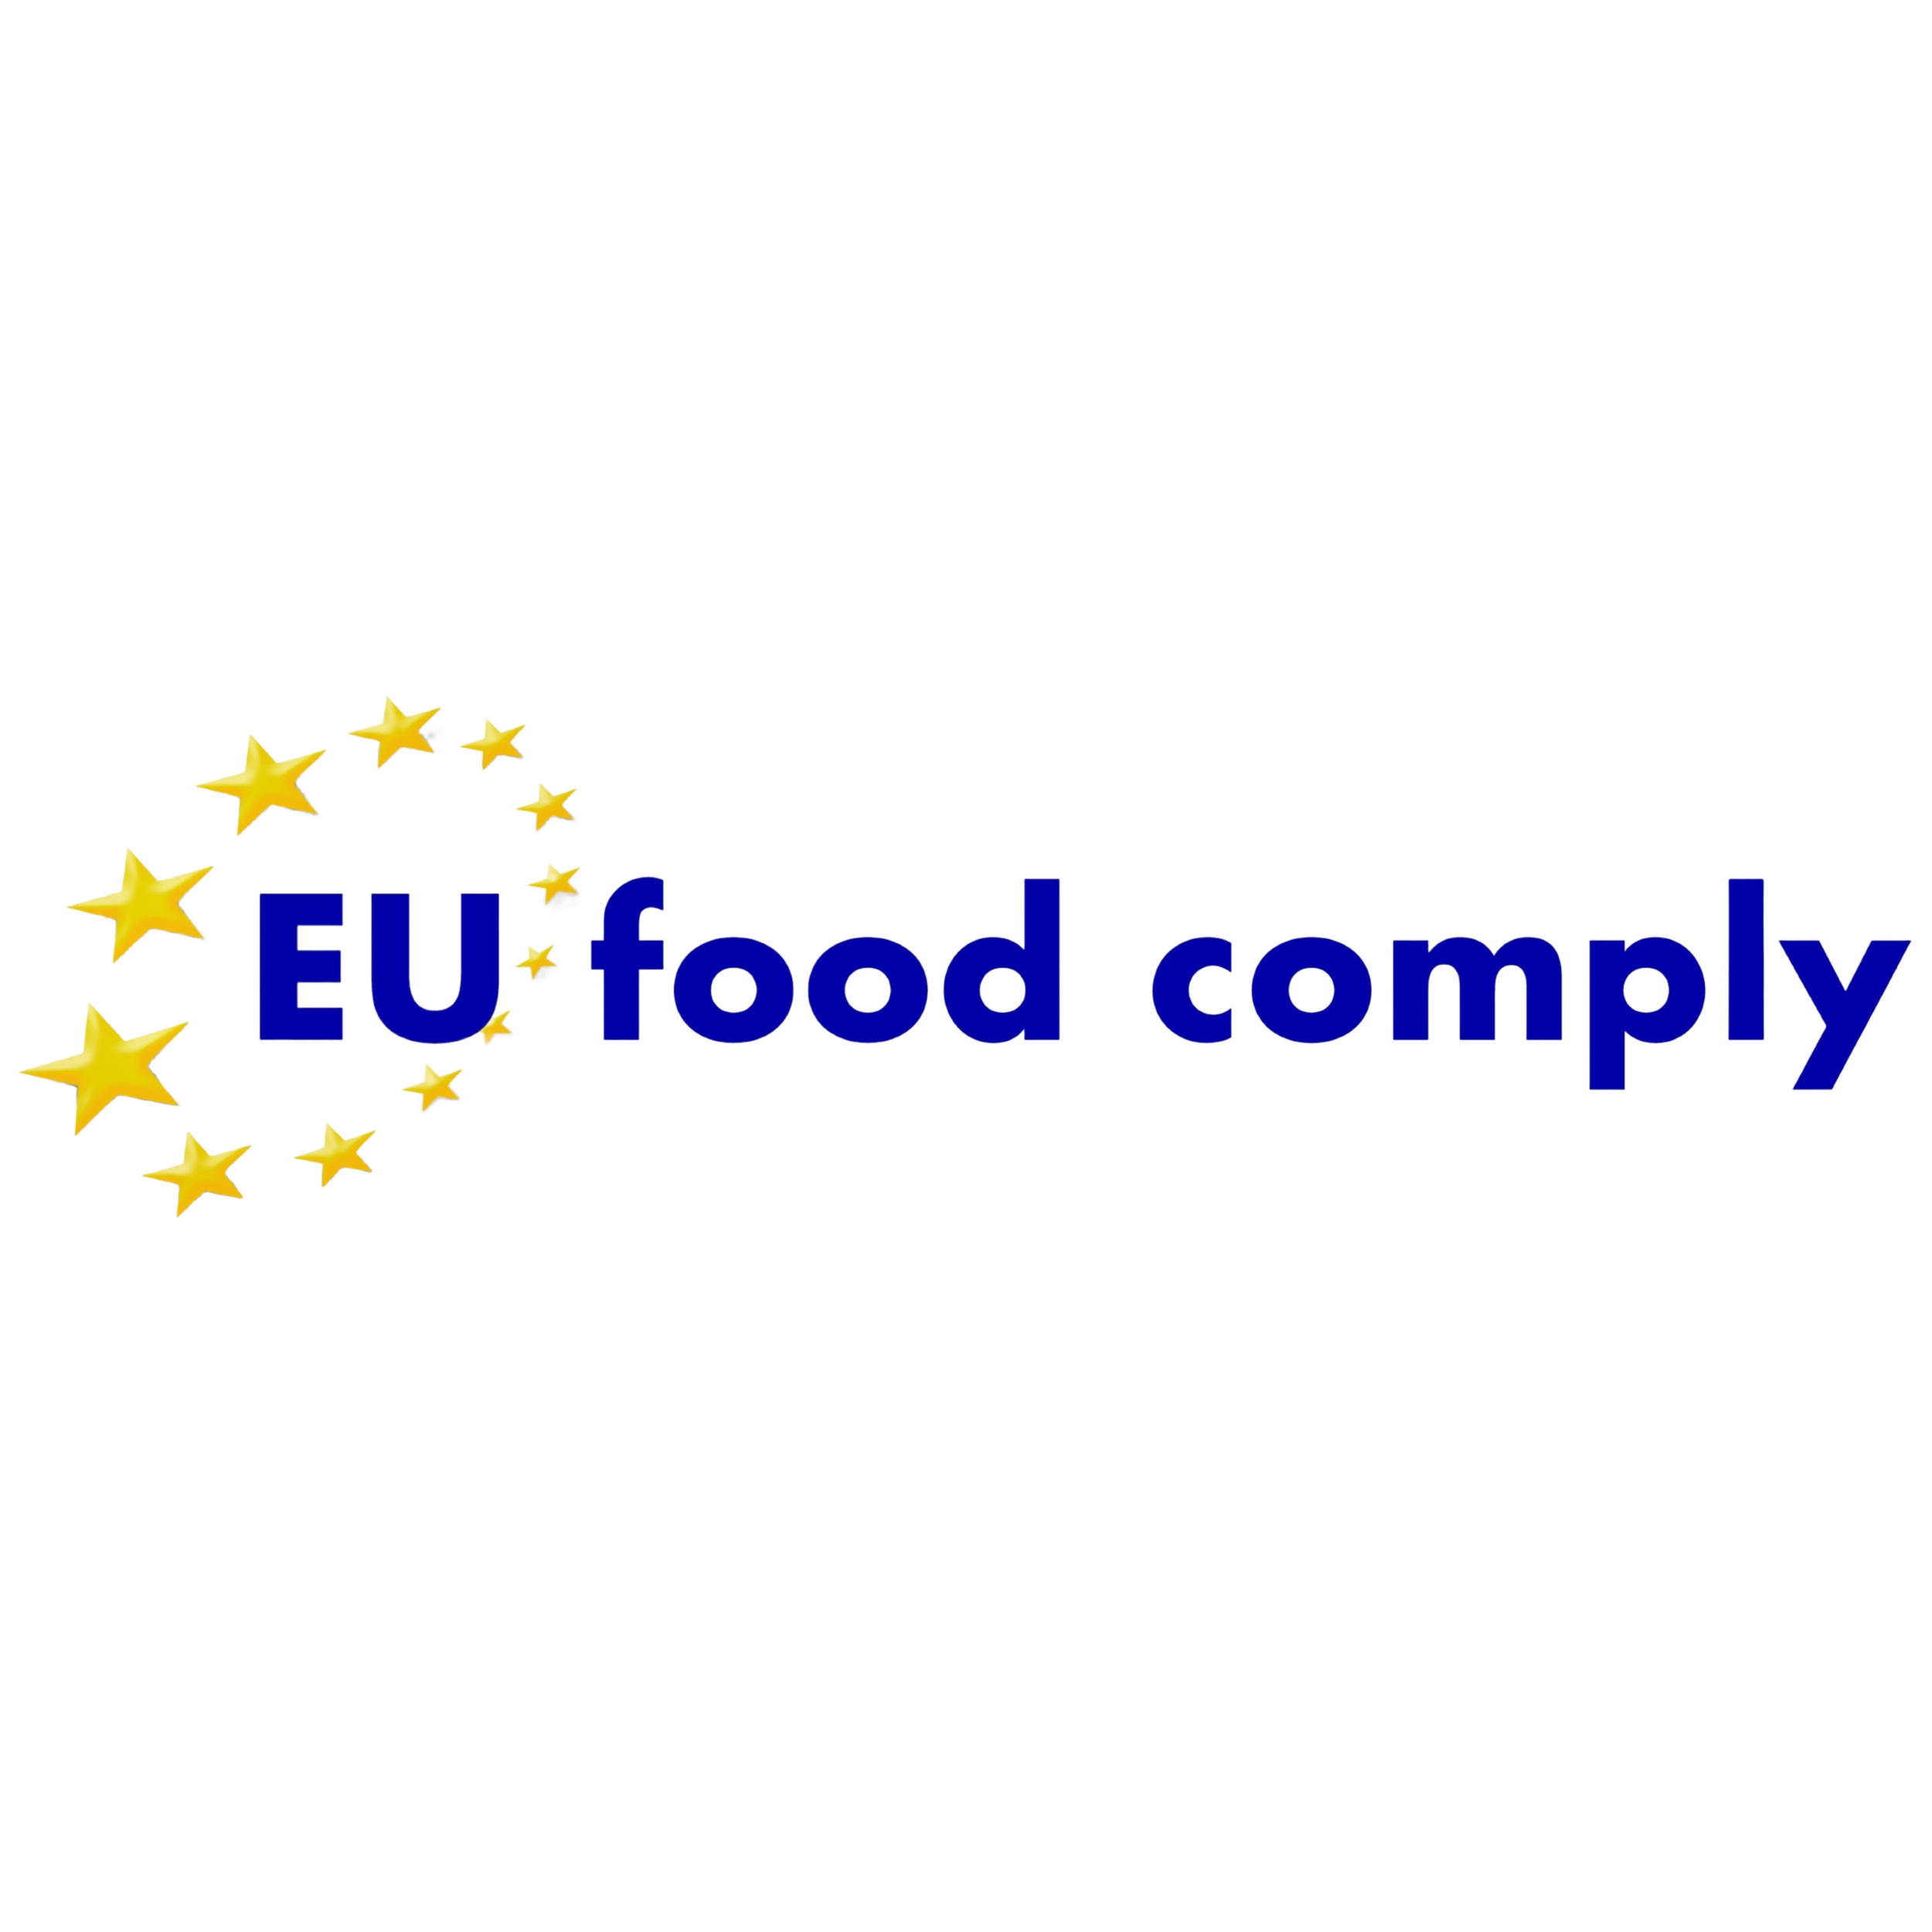 Food regulatory, technical compliance of pre-packaged foods for EU market